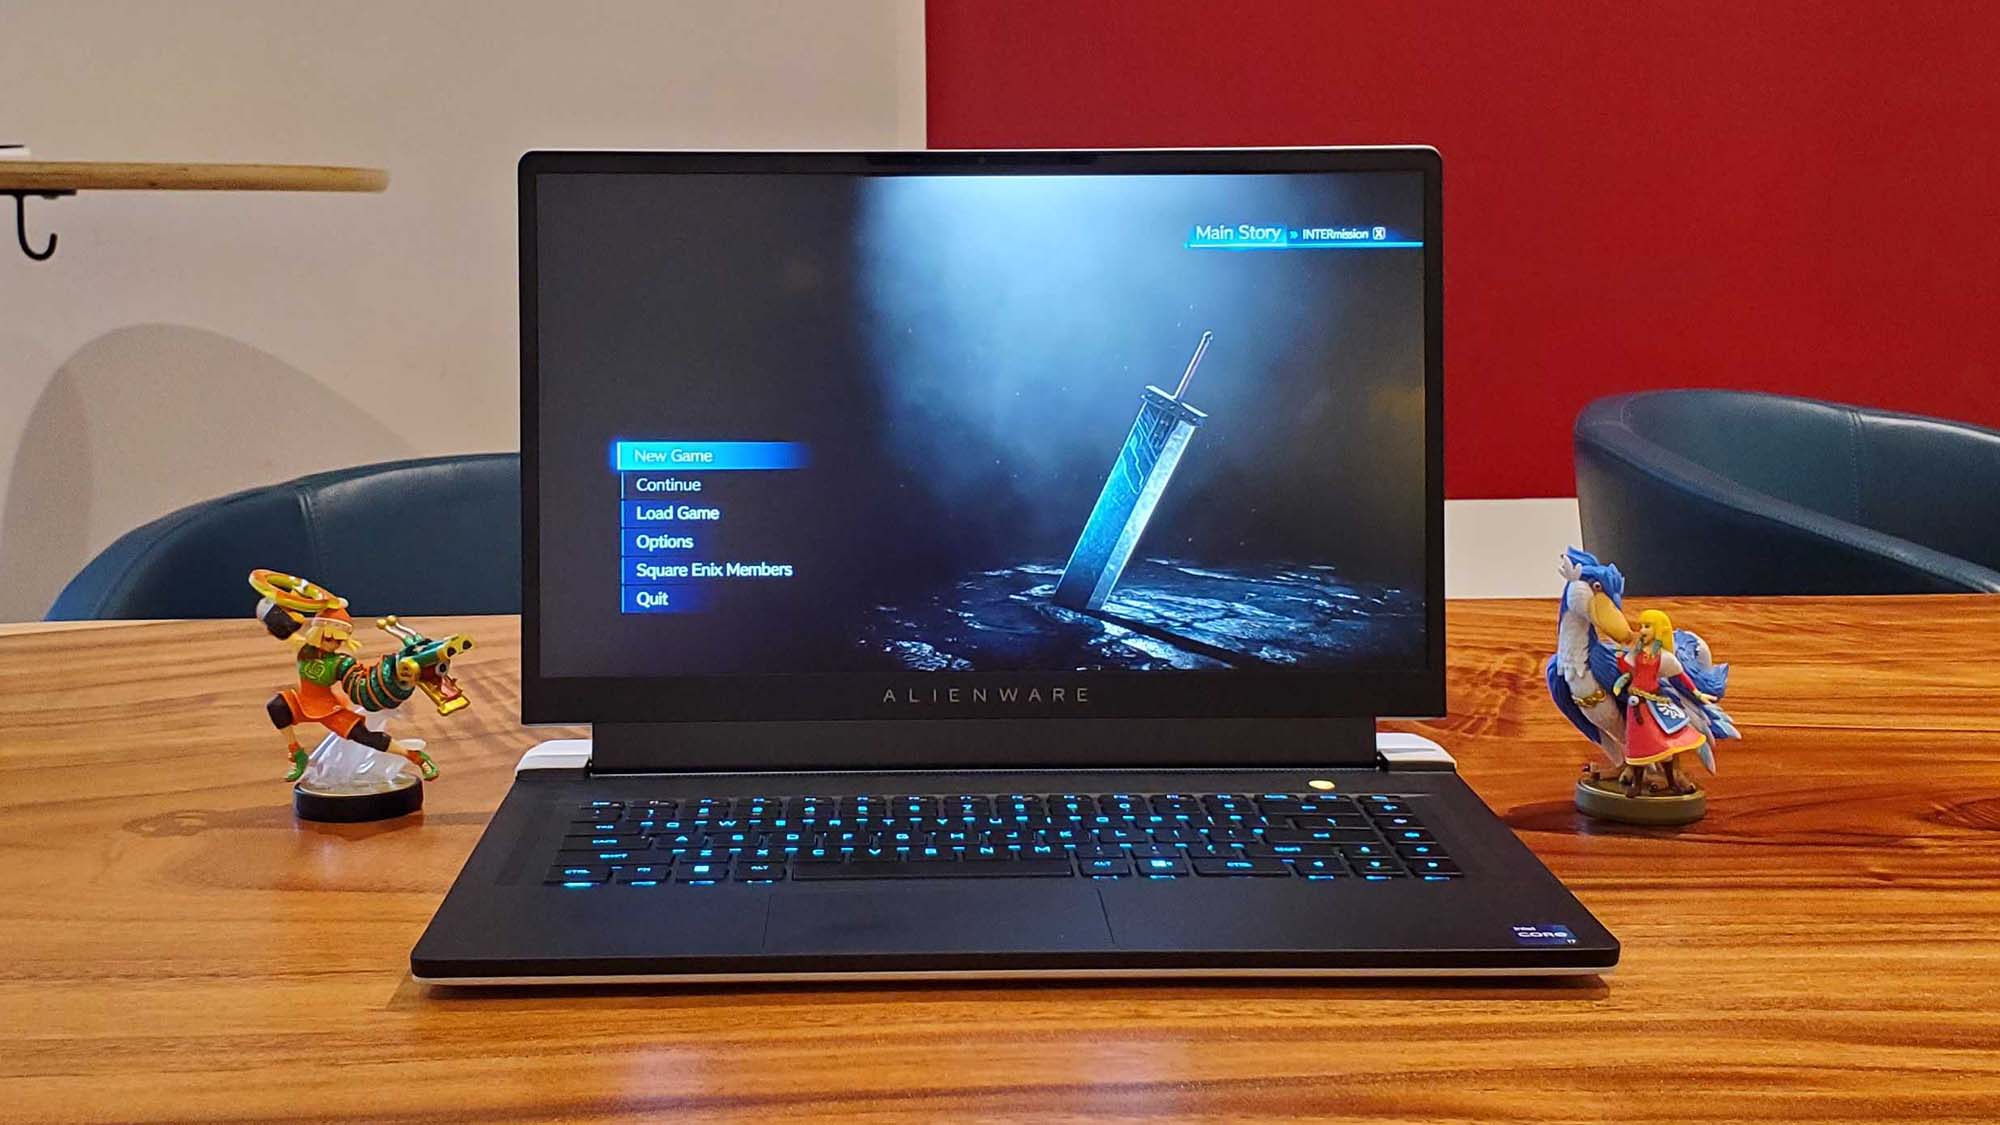 An Alienware x15 R2 gaming laptop on a wooden table